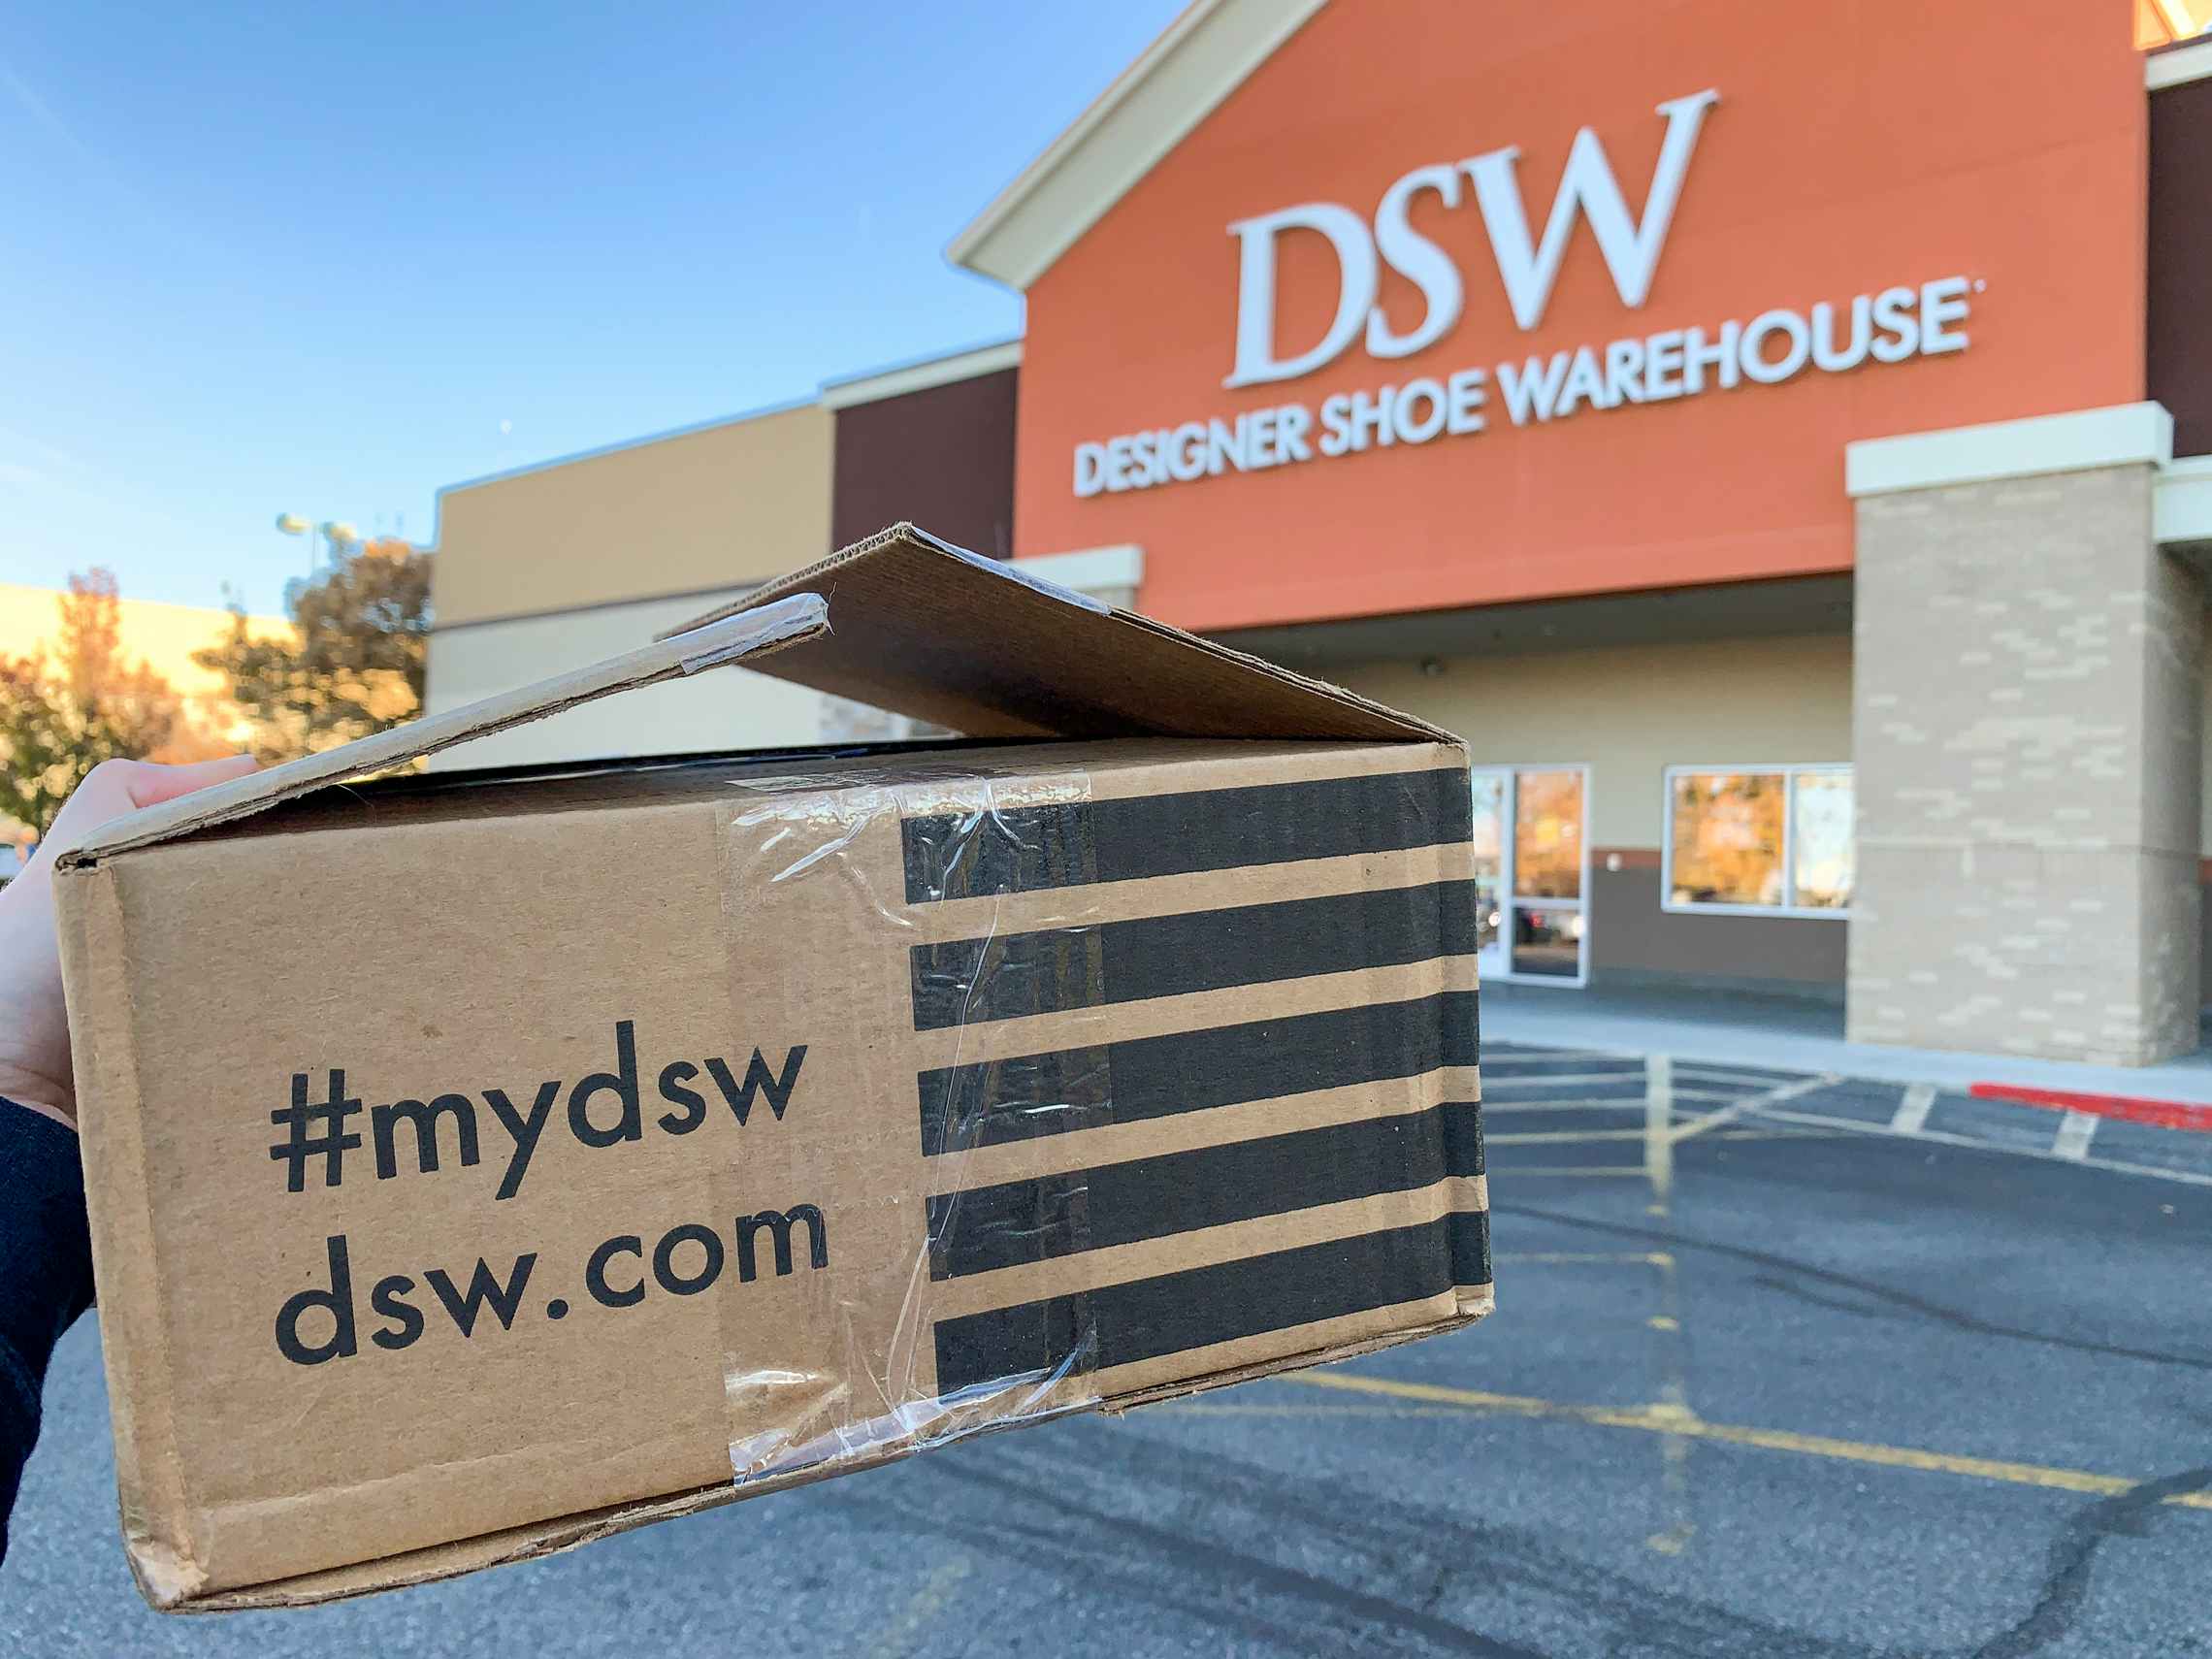 A DSW.com shipping box held in front of a DSW store.